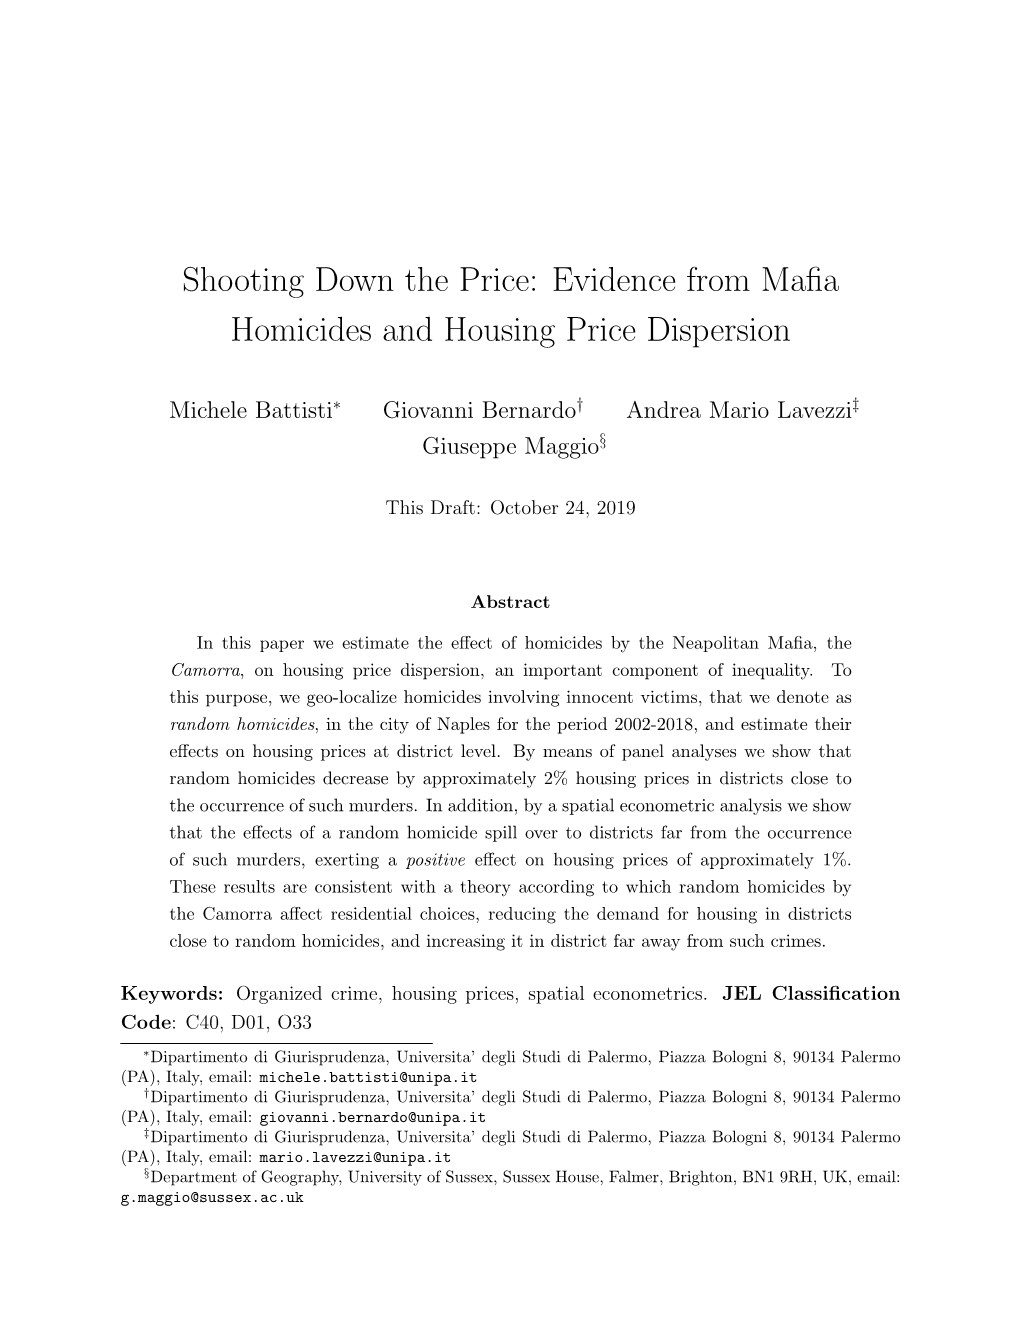 Evidence from Mafia Homicides and Housing Price Dispersion